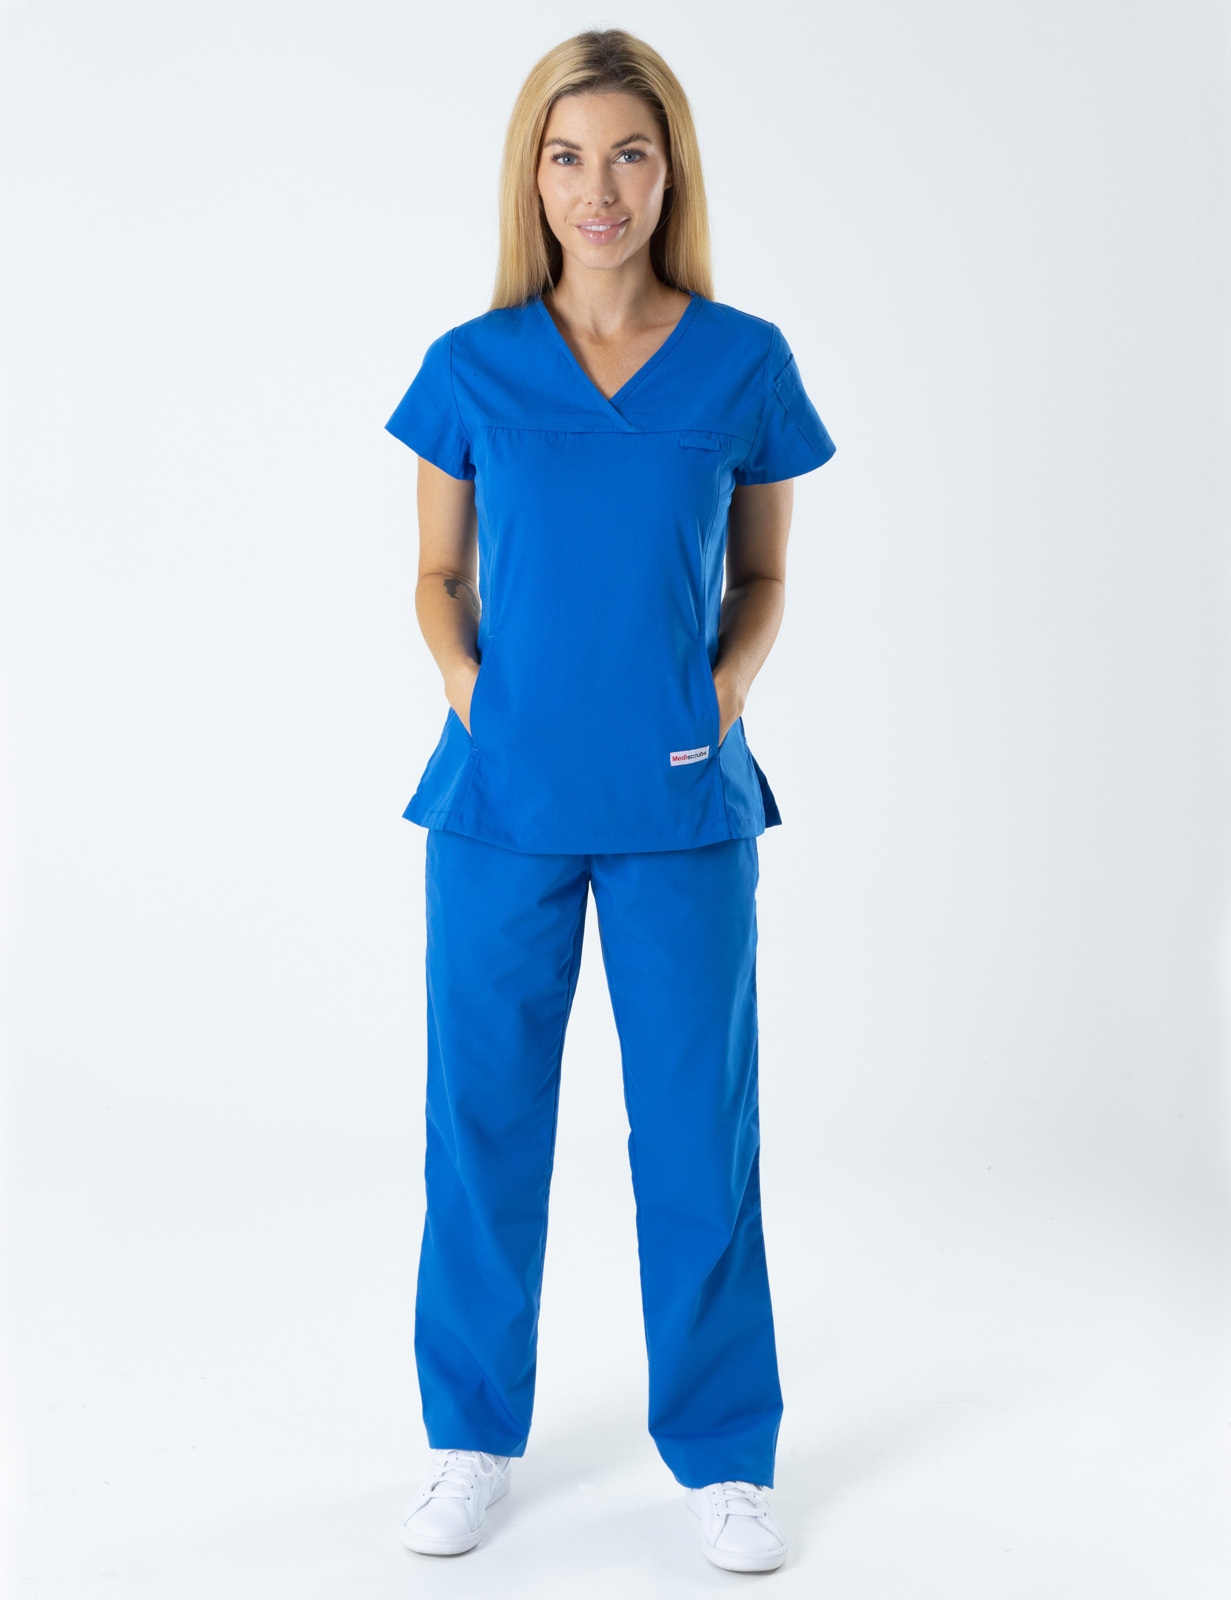 Canberra Hospital - Cardiology Cardiac Sonographer (Women's Fit Solid Scrub Top and Cargo Pants in Royal incl Logos)